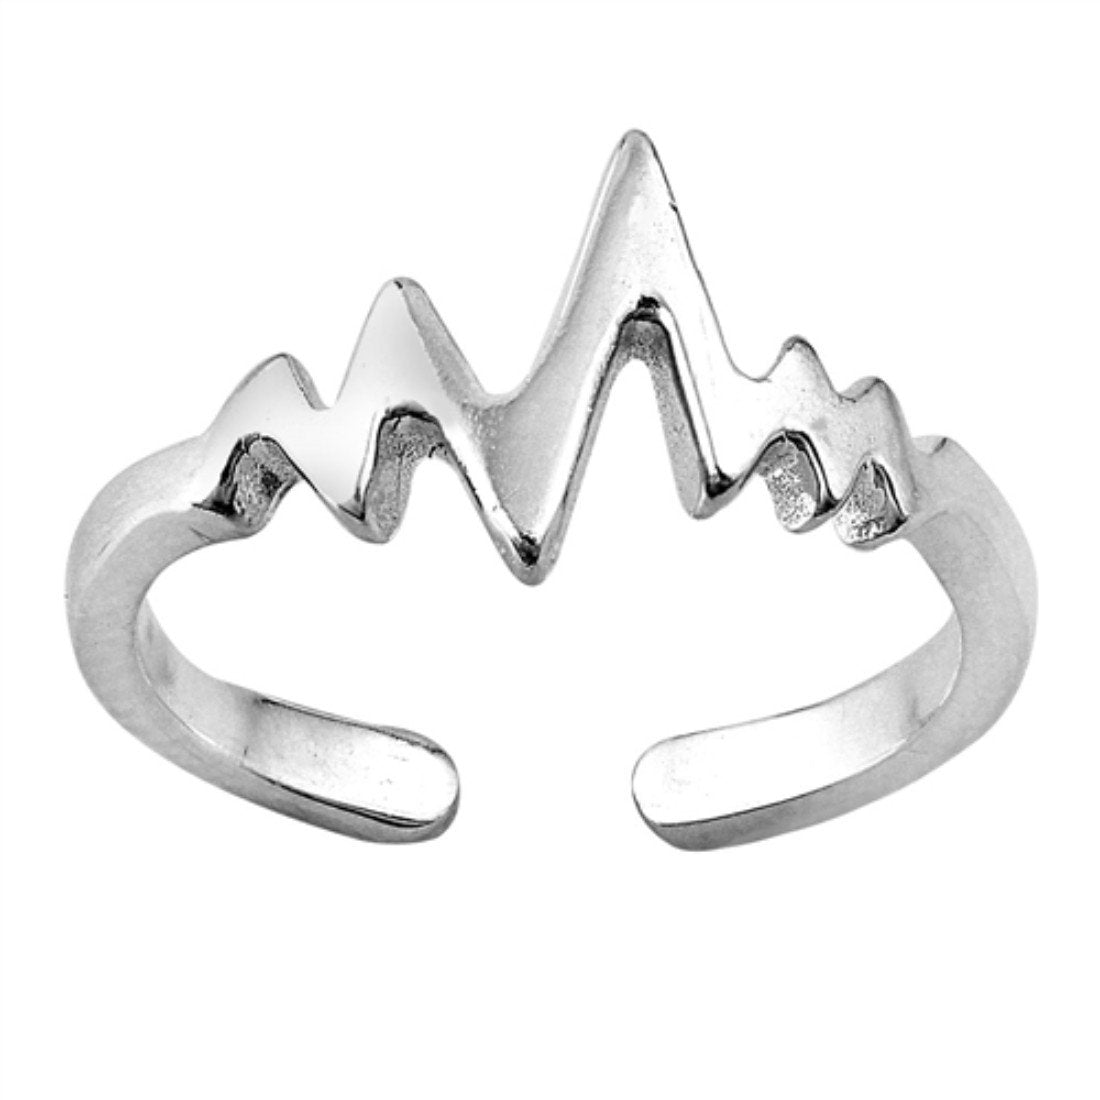 Heartbeat Silver Toe Ring Adjustable Band 925 Sterling Silver (8mm)